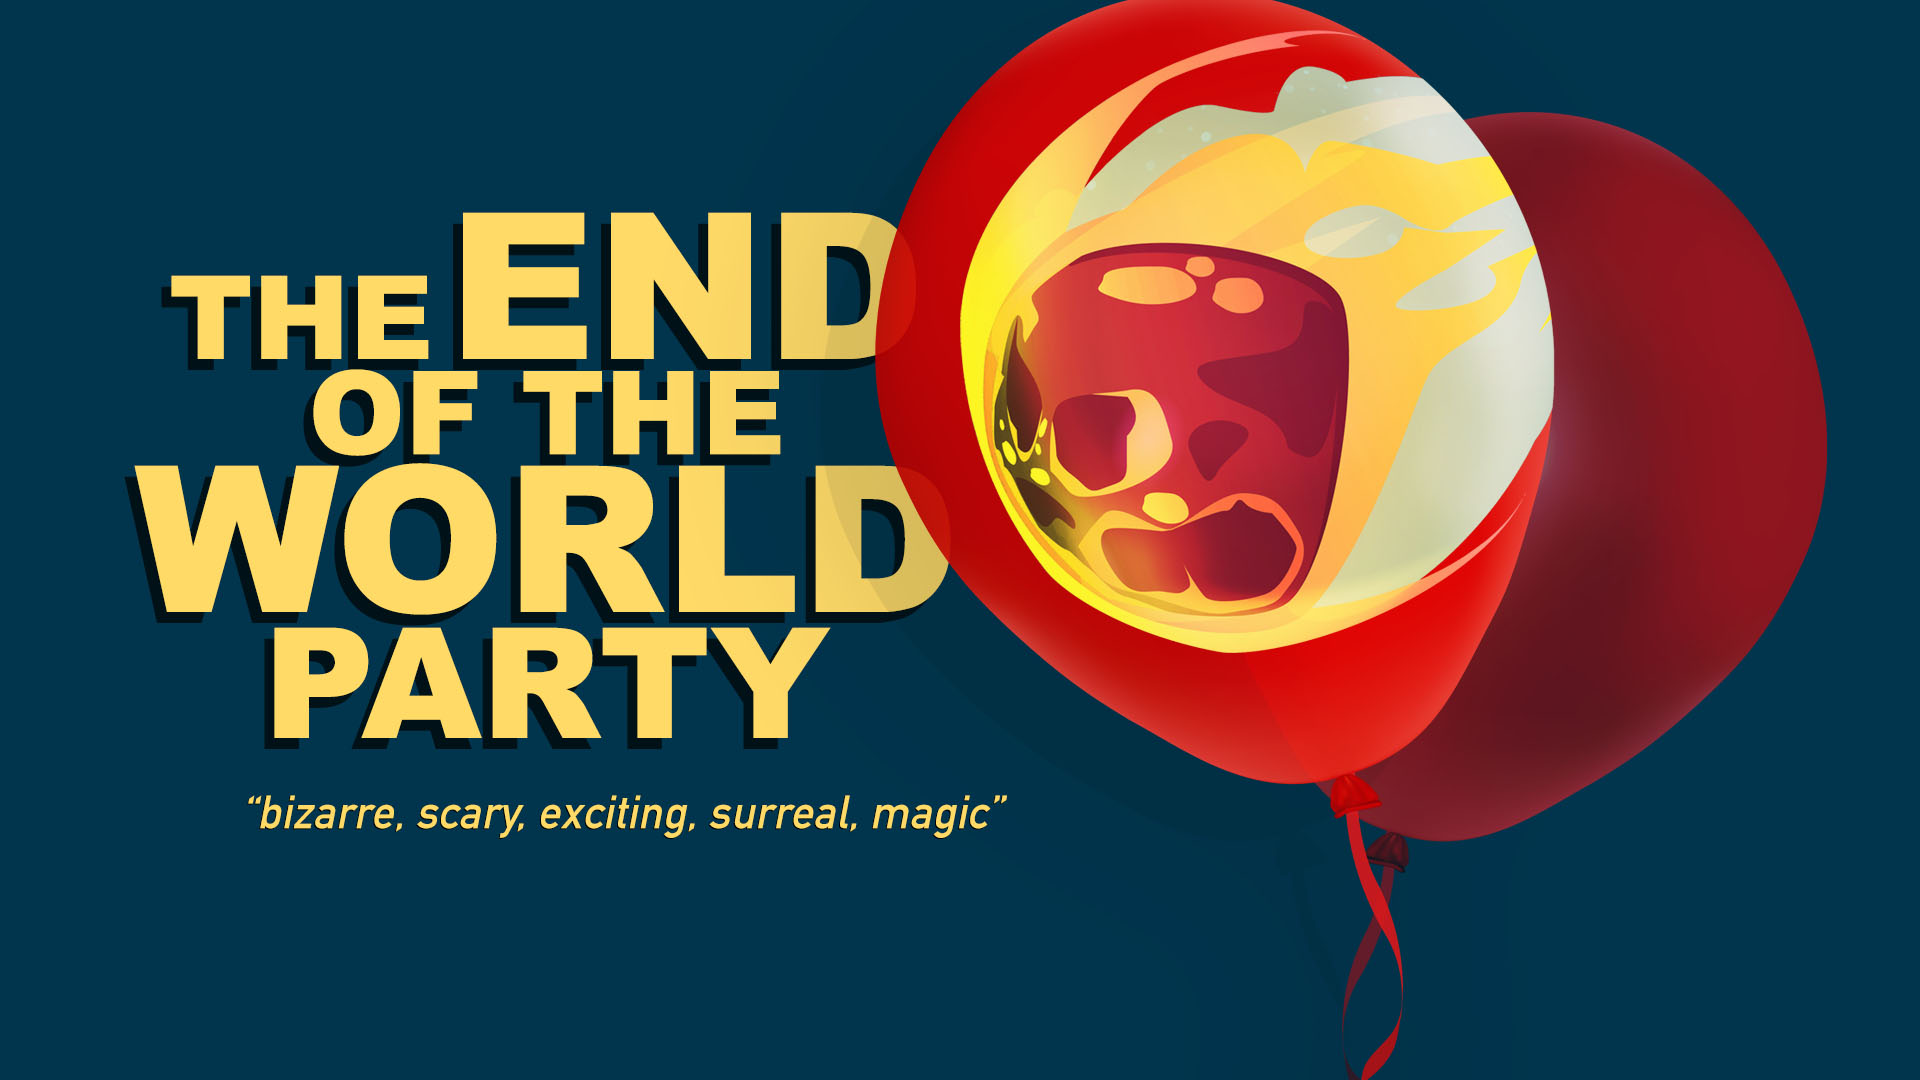 The End of the World Party - "bizarre, scary, exciting, surreal, magic"